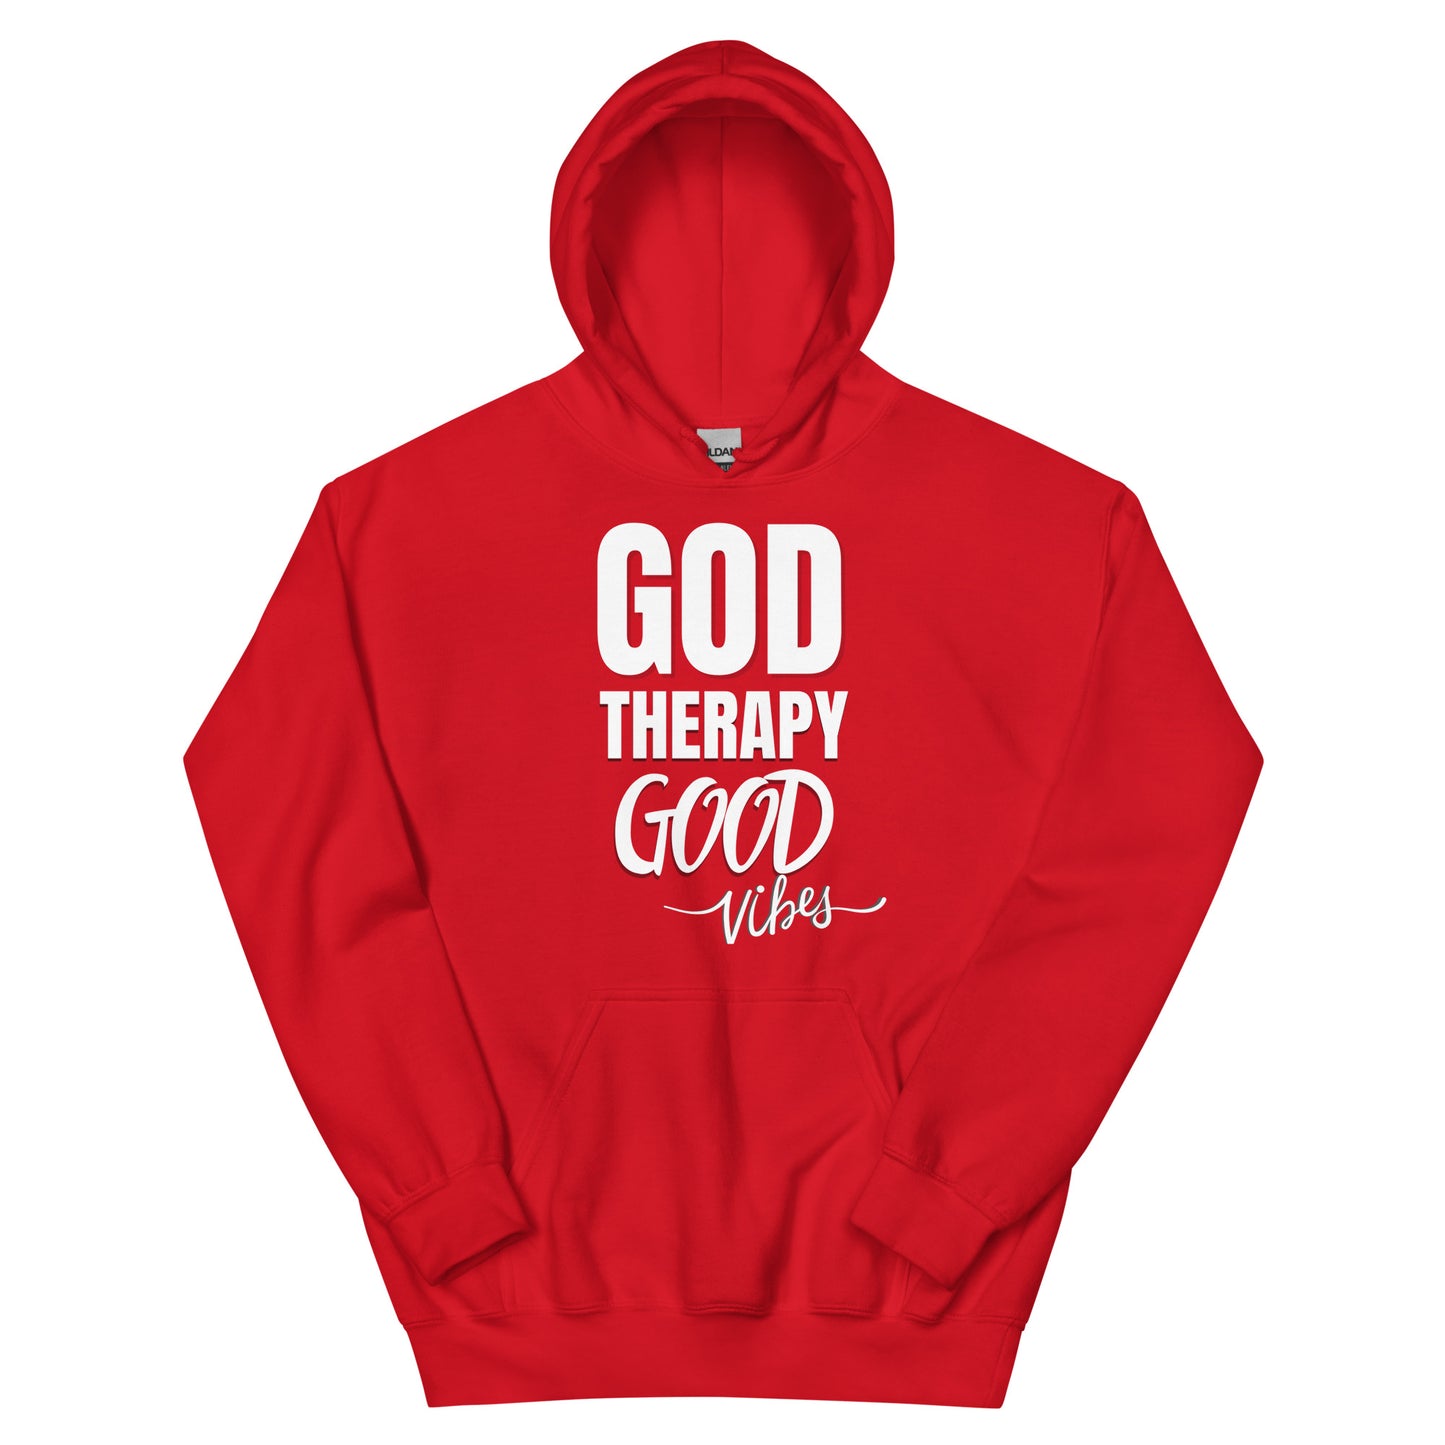 GOD Therapy & Good Vibes Hoodie